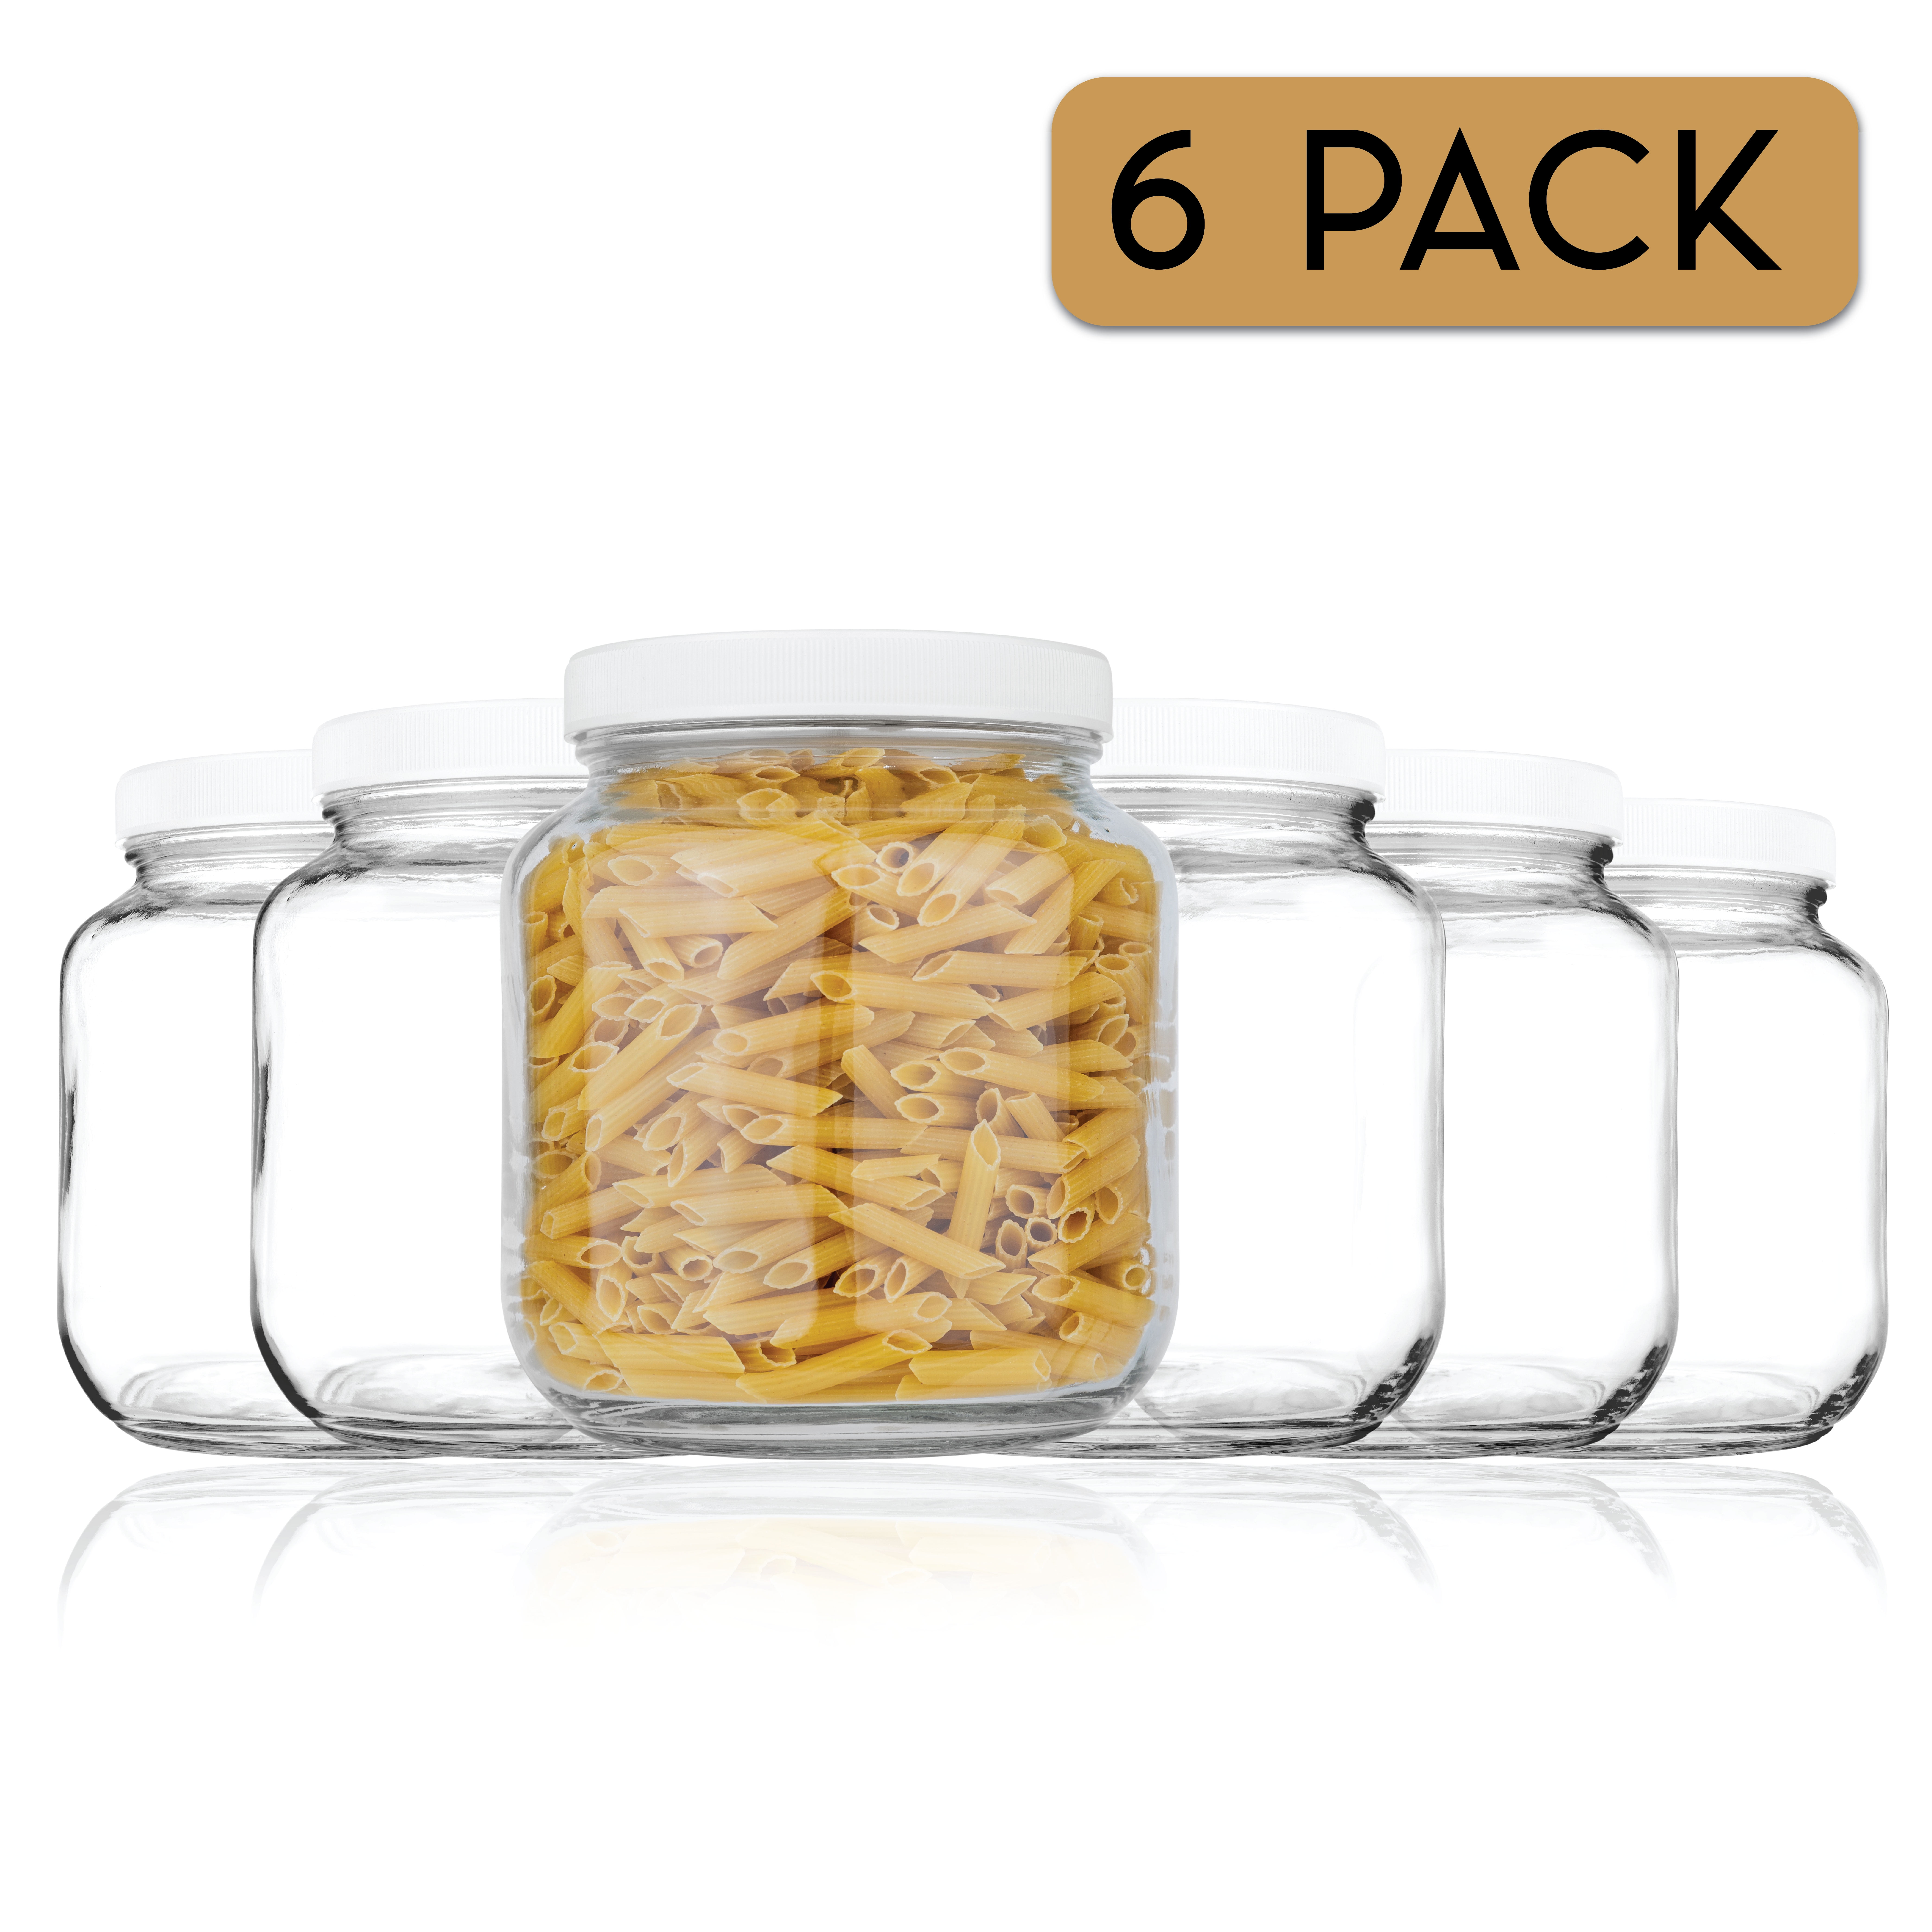 myFERMENTS Large Glass Jars with Lids 4,25 l Fermentation 50x50cm Muslin Cloths & Rubber Bands Conserves Kefir Easy Clean Airtight Wide Mouth Containers Kombucha Pickling Set of 2 